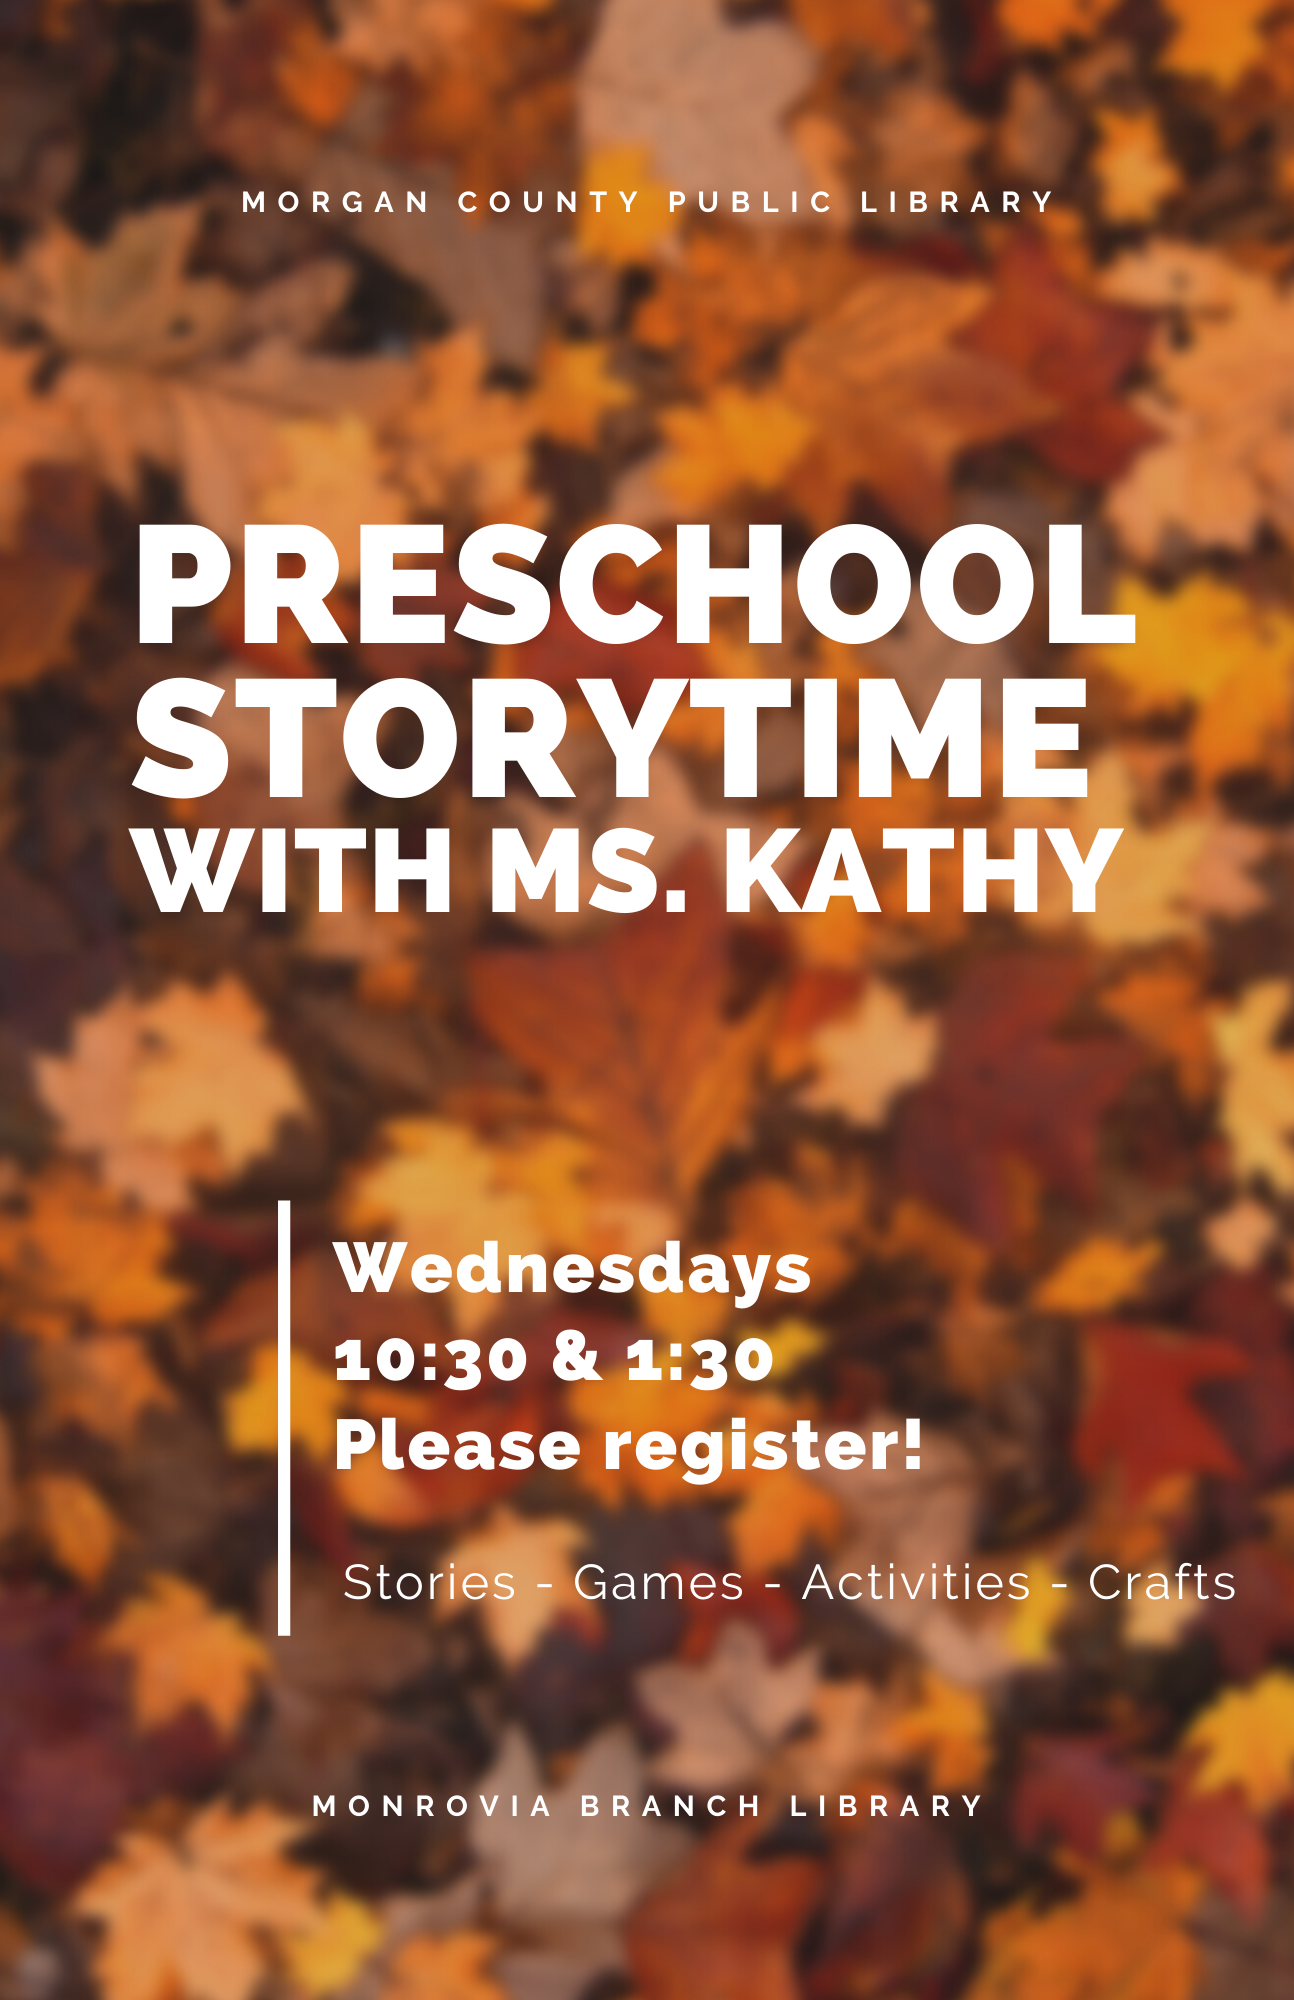 fall leaves  Text:  morgan county public library; preschool storytime with ms. kathy; wednesdays 10:30 & 1:30 please register; stories - games - activities - crafts; monrovia branch library